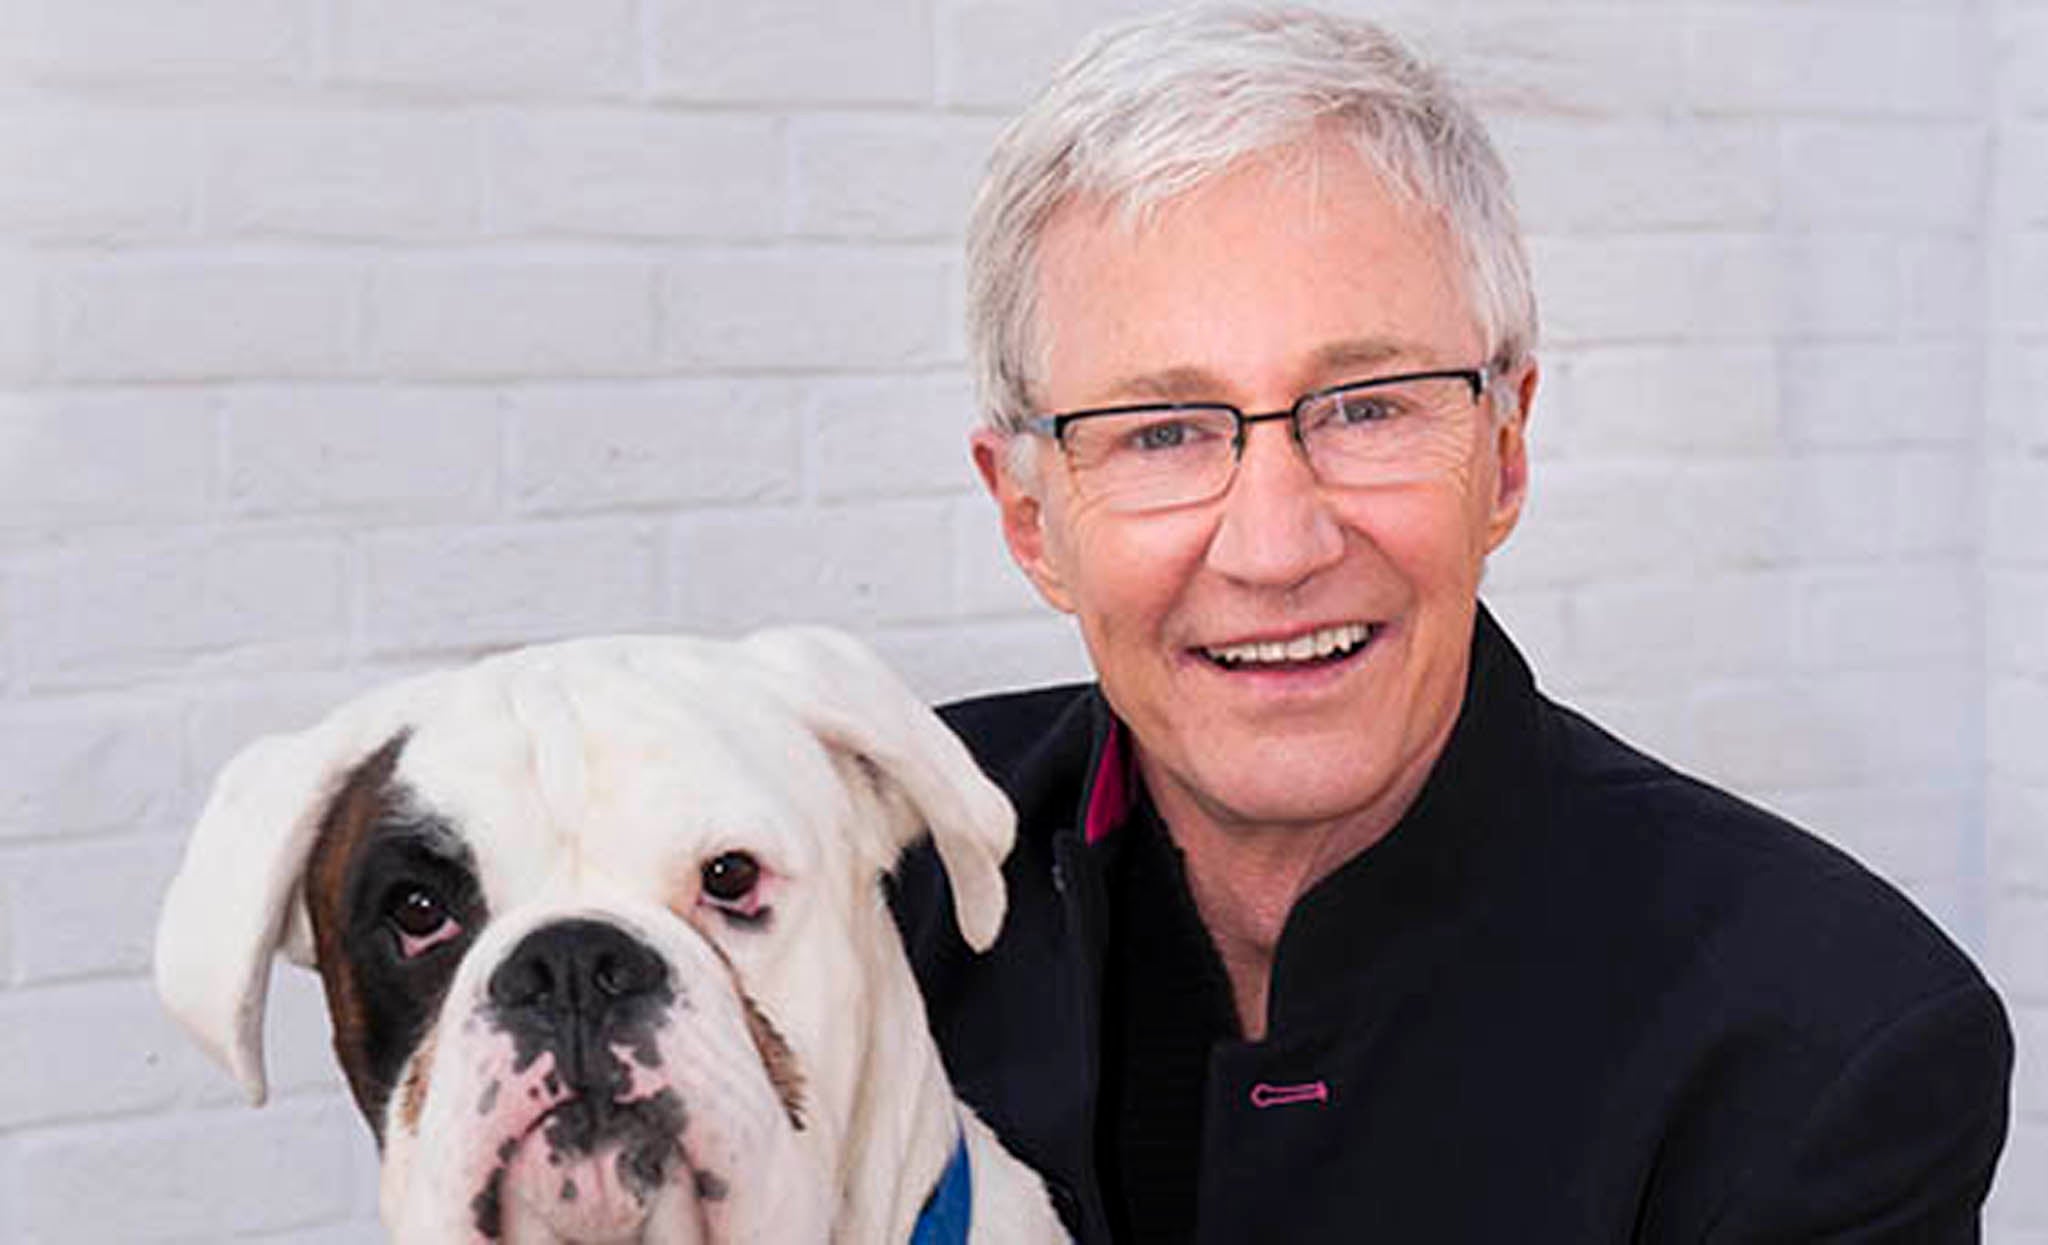 Paul O'Grady in his show 'For the Love of Dogs'